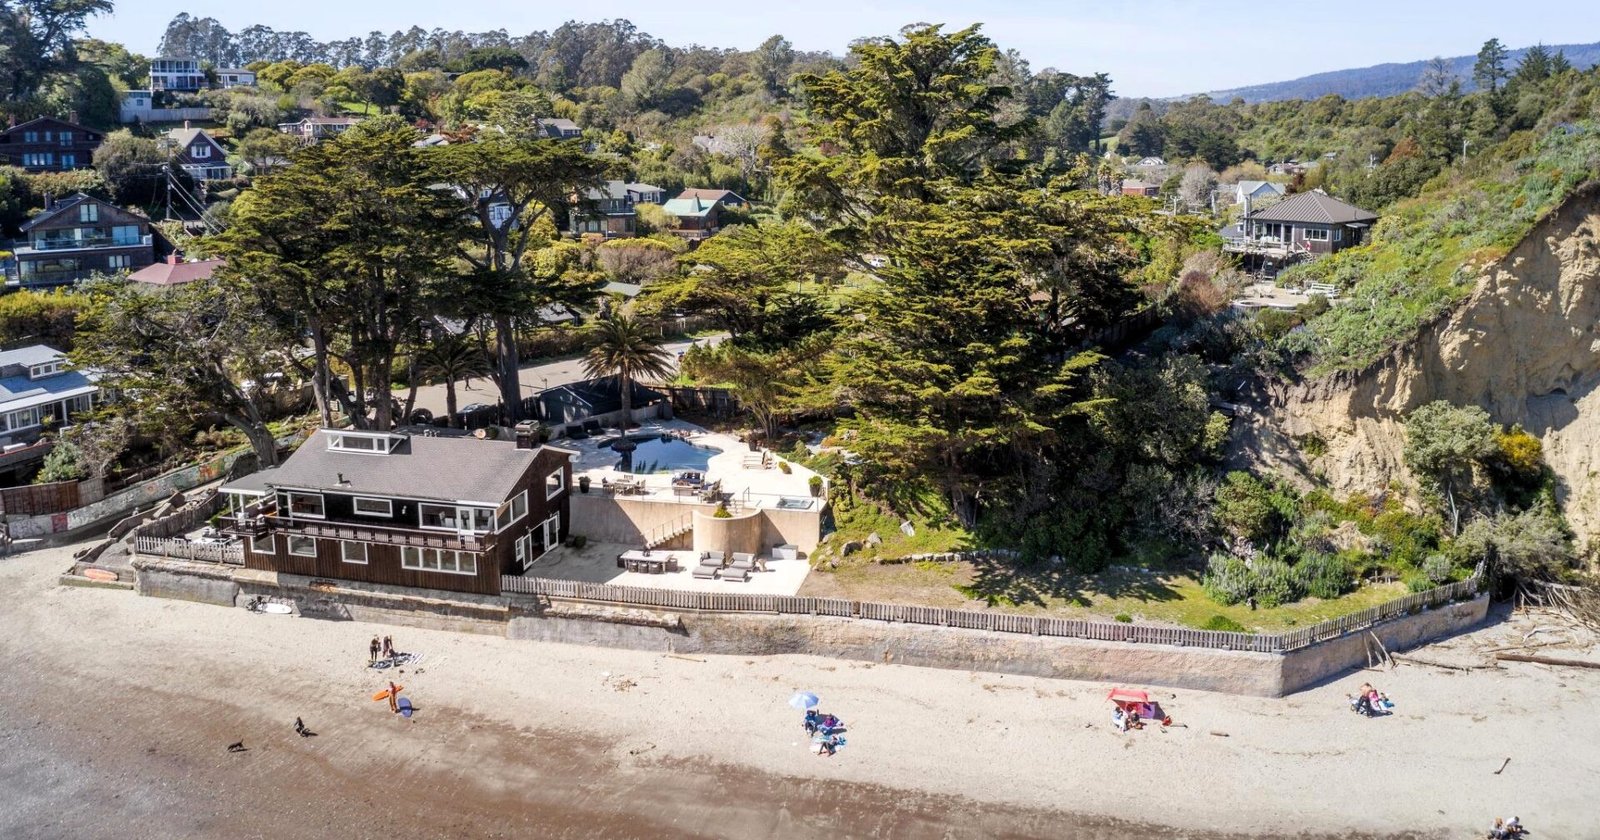 Live like a rock star in Grace Slick's stunning California beach house, now for sale at $15M. Enjoy ocean views, a guitar-shaped pool, and rock history. Explore more!